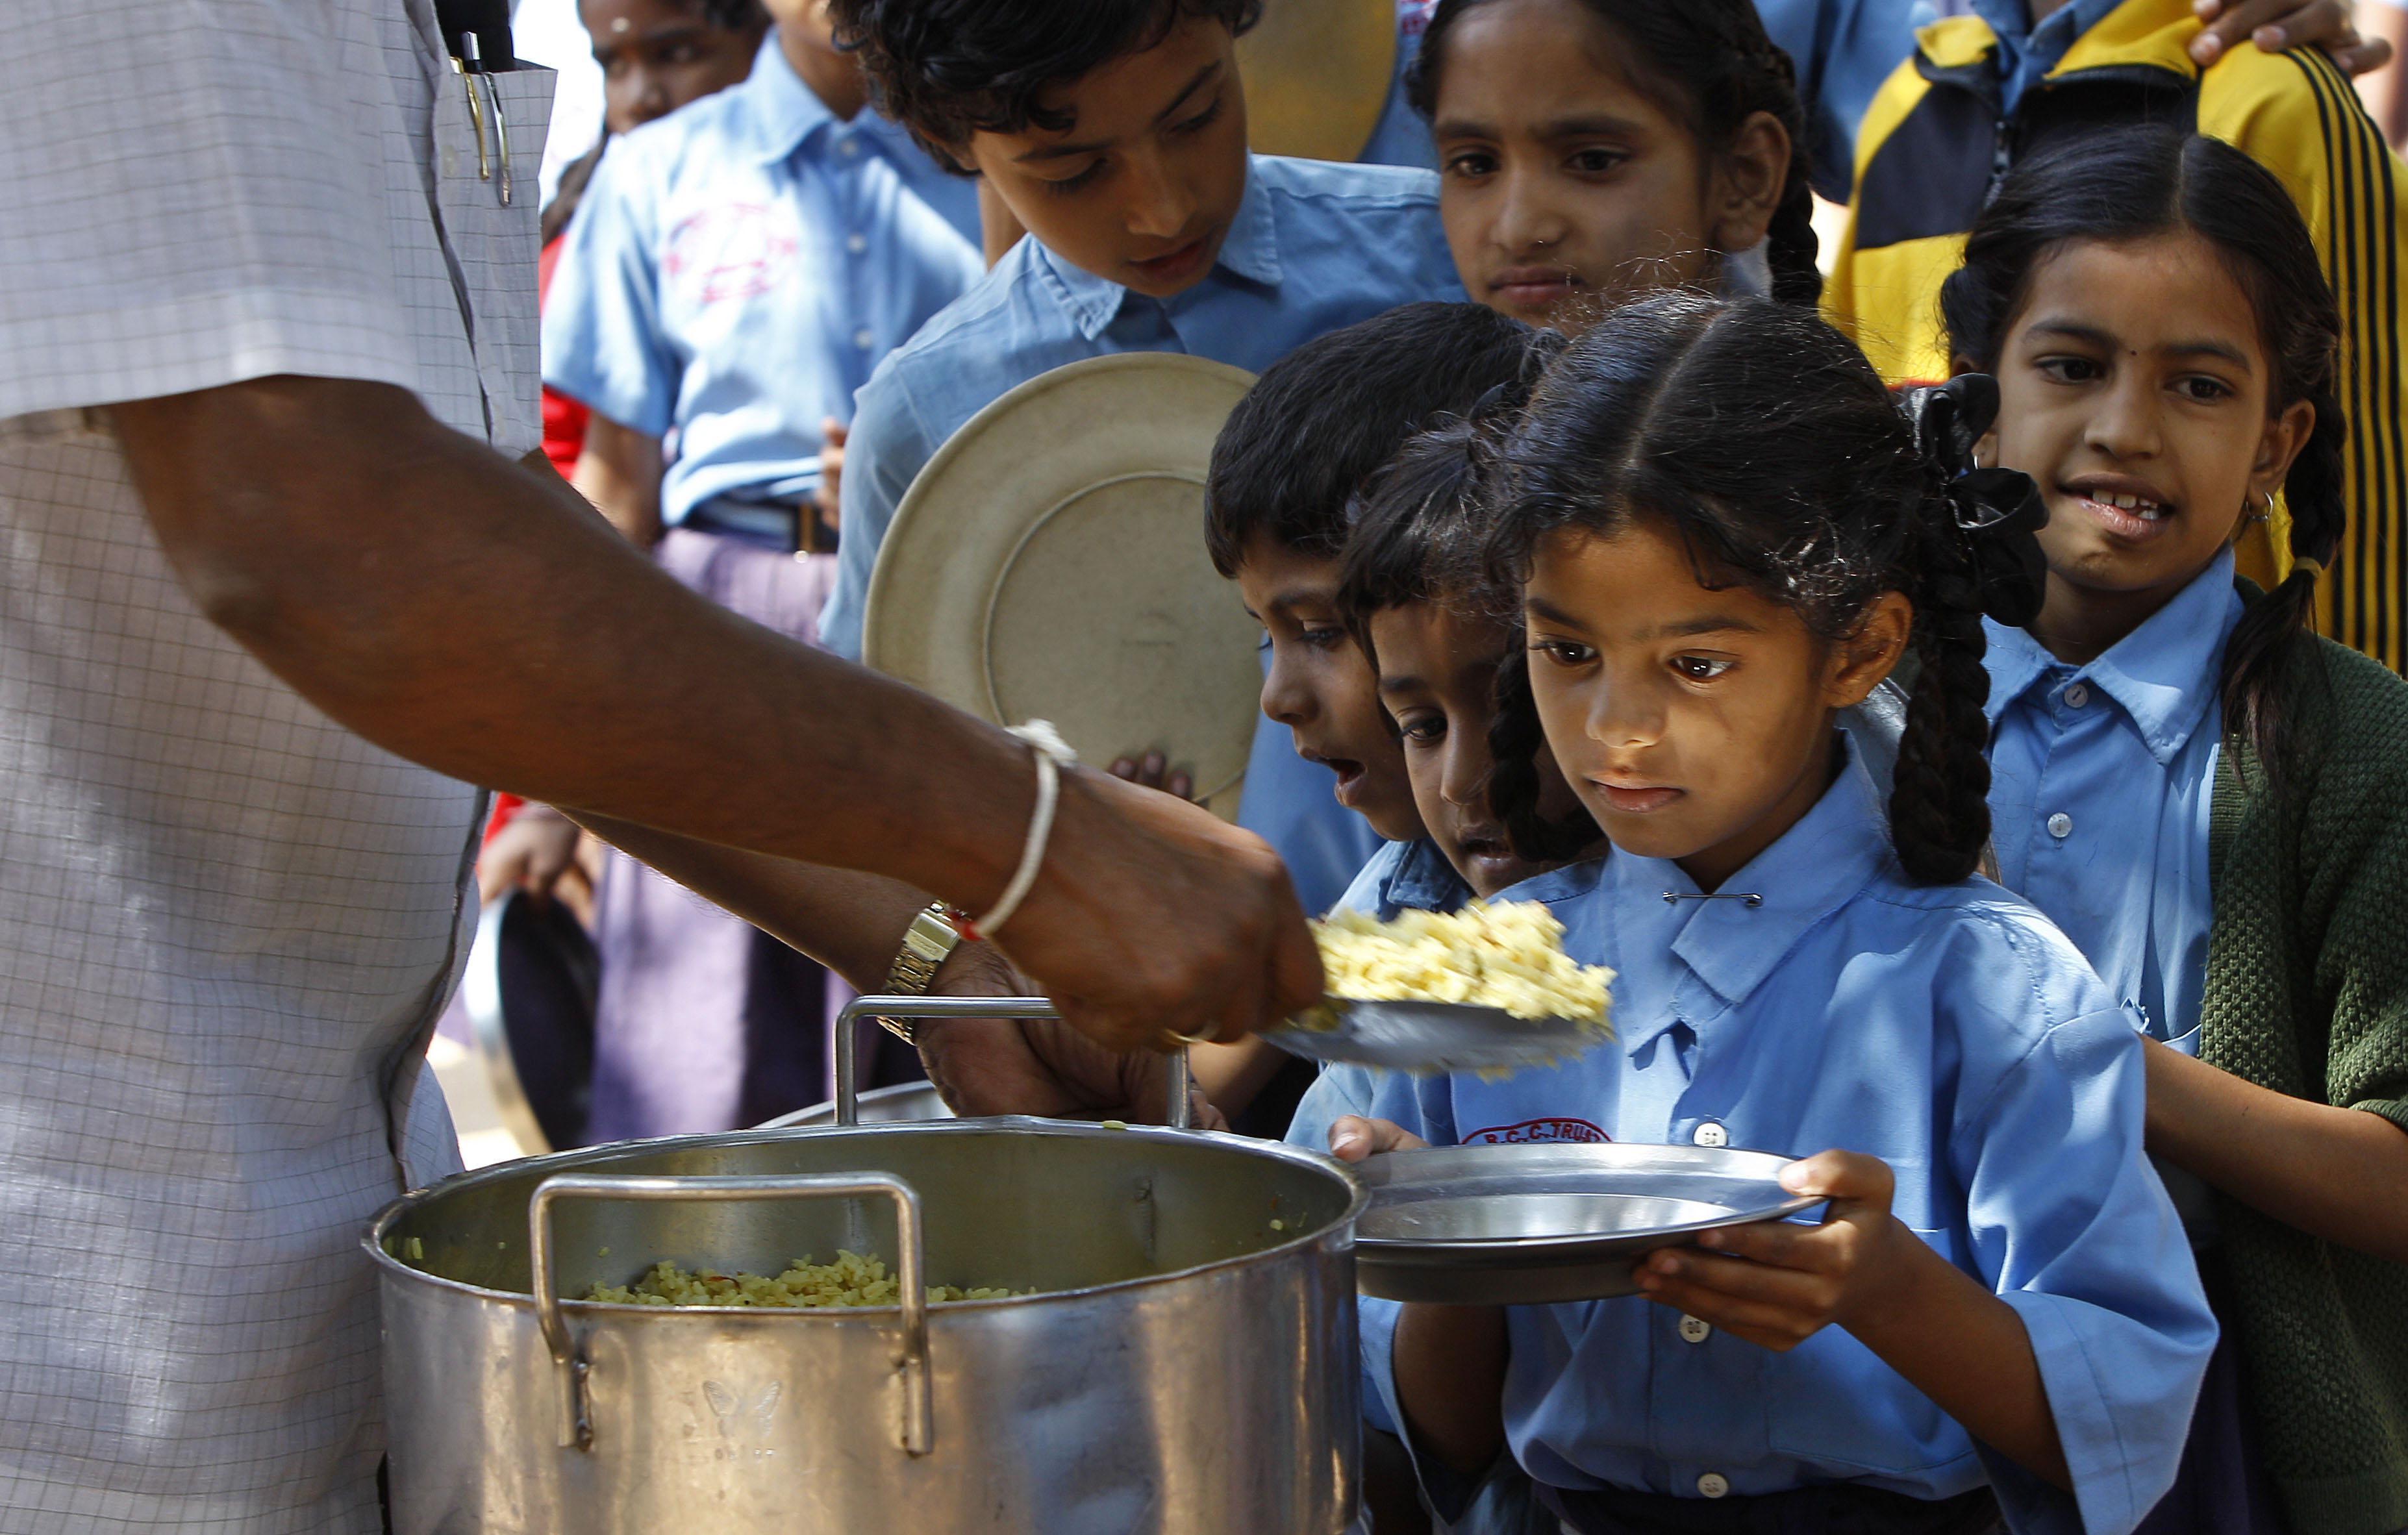 A girl looks at food served to her for free at a government-run school in Bangalore, India, Wednesday, Jan. 11, 2012. UNICEF's latest data say one-third of the world's malnourished children younger than 3 lives in India, a rate worse than sub-Saharan Africa. Indian Prime Minister Manmohan Singh has called child malnutrition the country's shame. (AP Photo/Aijaz Rahi)